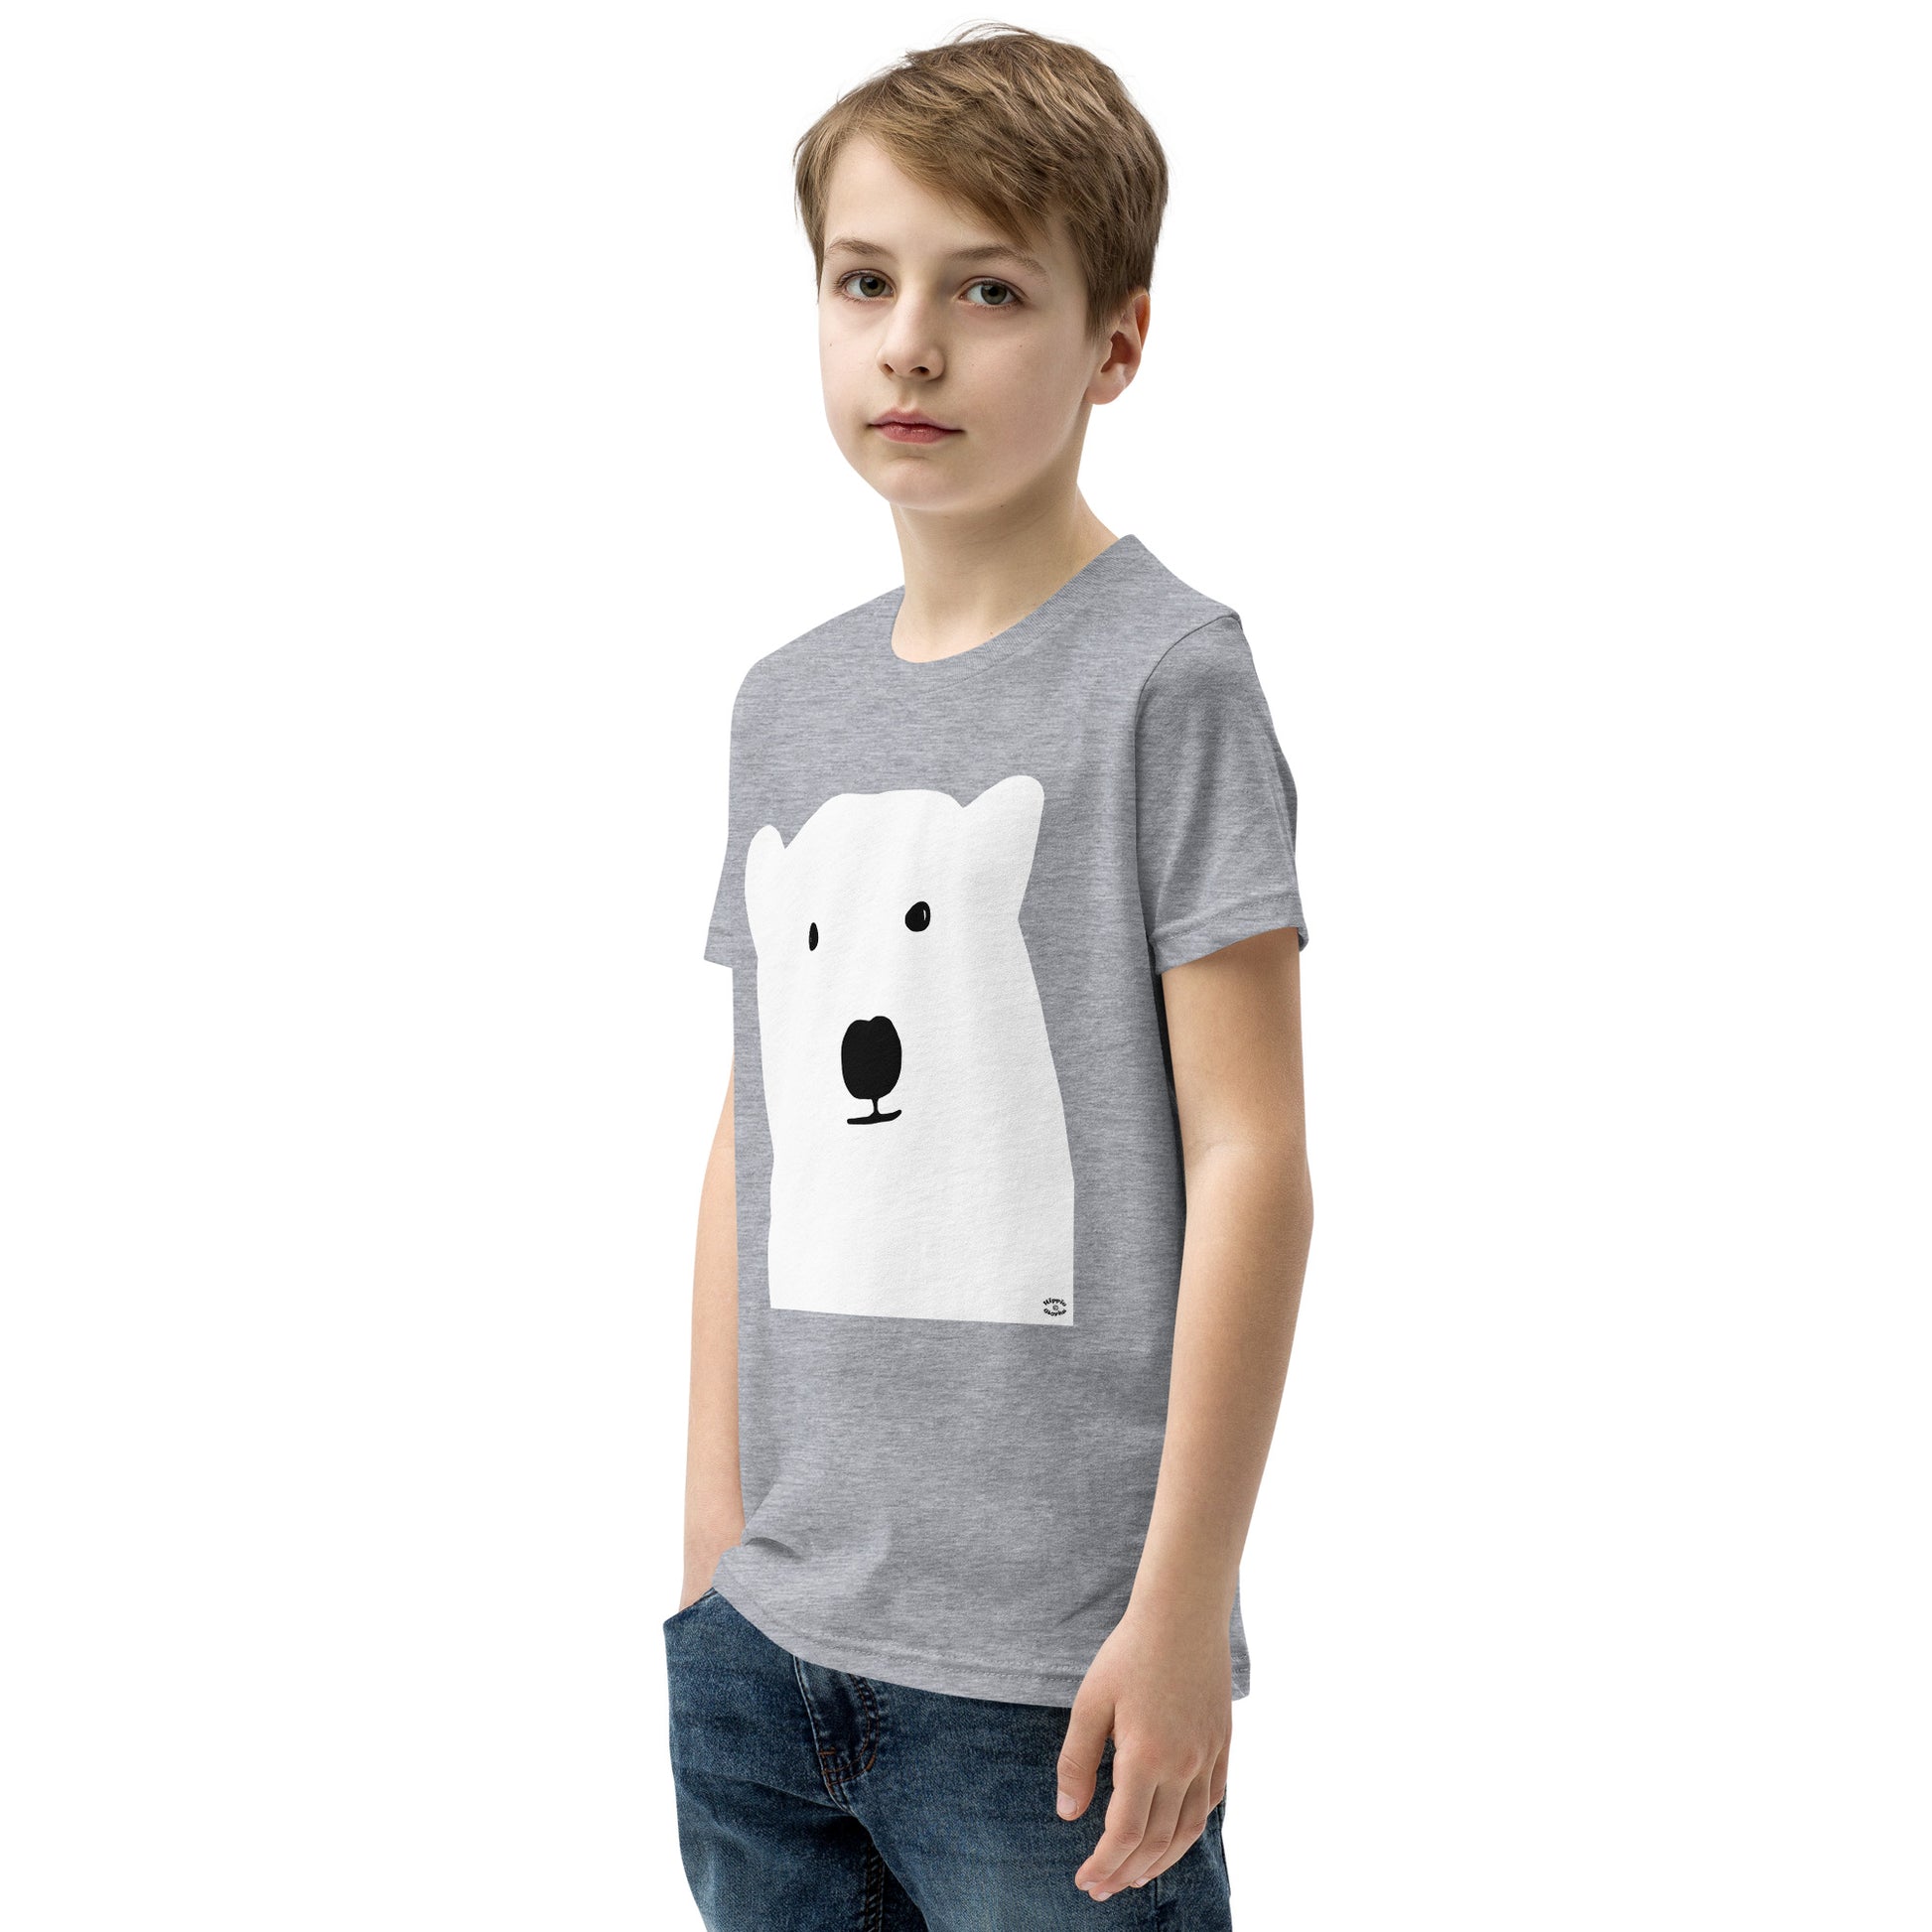 A picture of a young boy wearing a short sleeve tshirt with a kool polar bear face on the front-athletic-heather-left-front